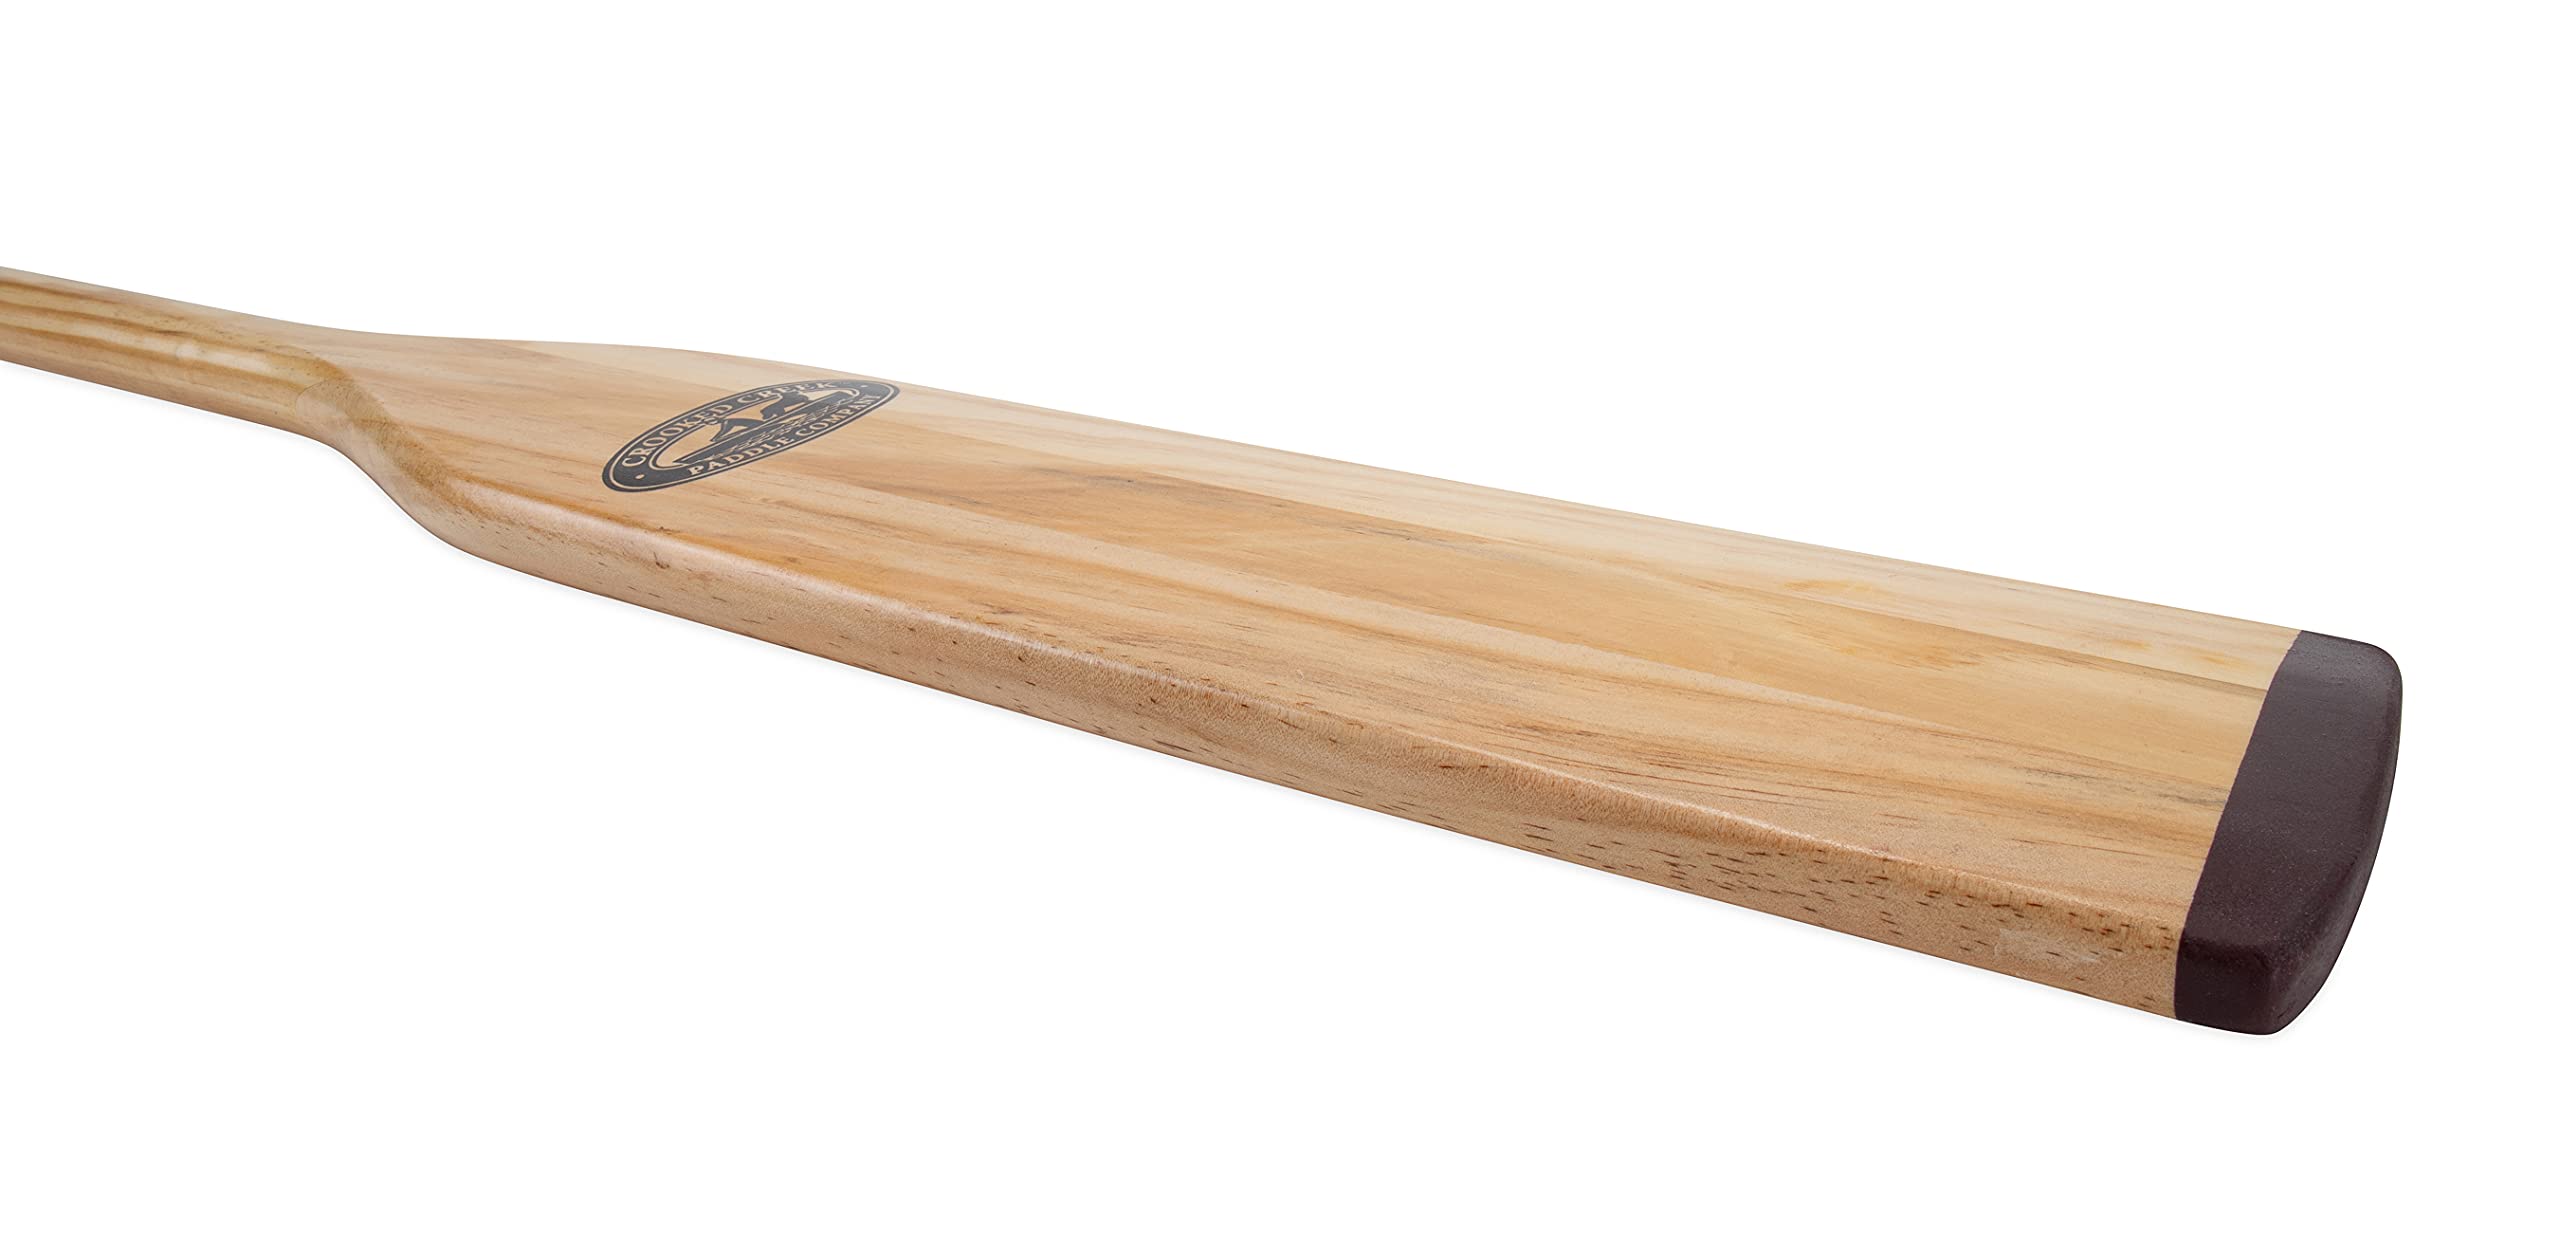 Natural Finish Wood Oar with Comfort Grip